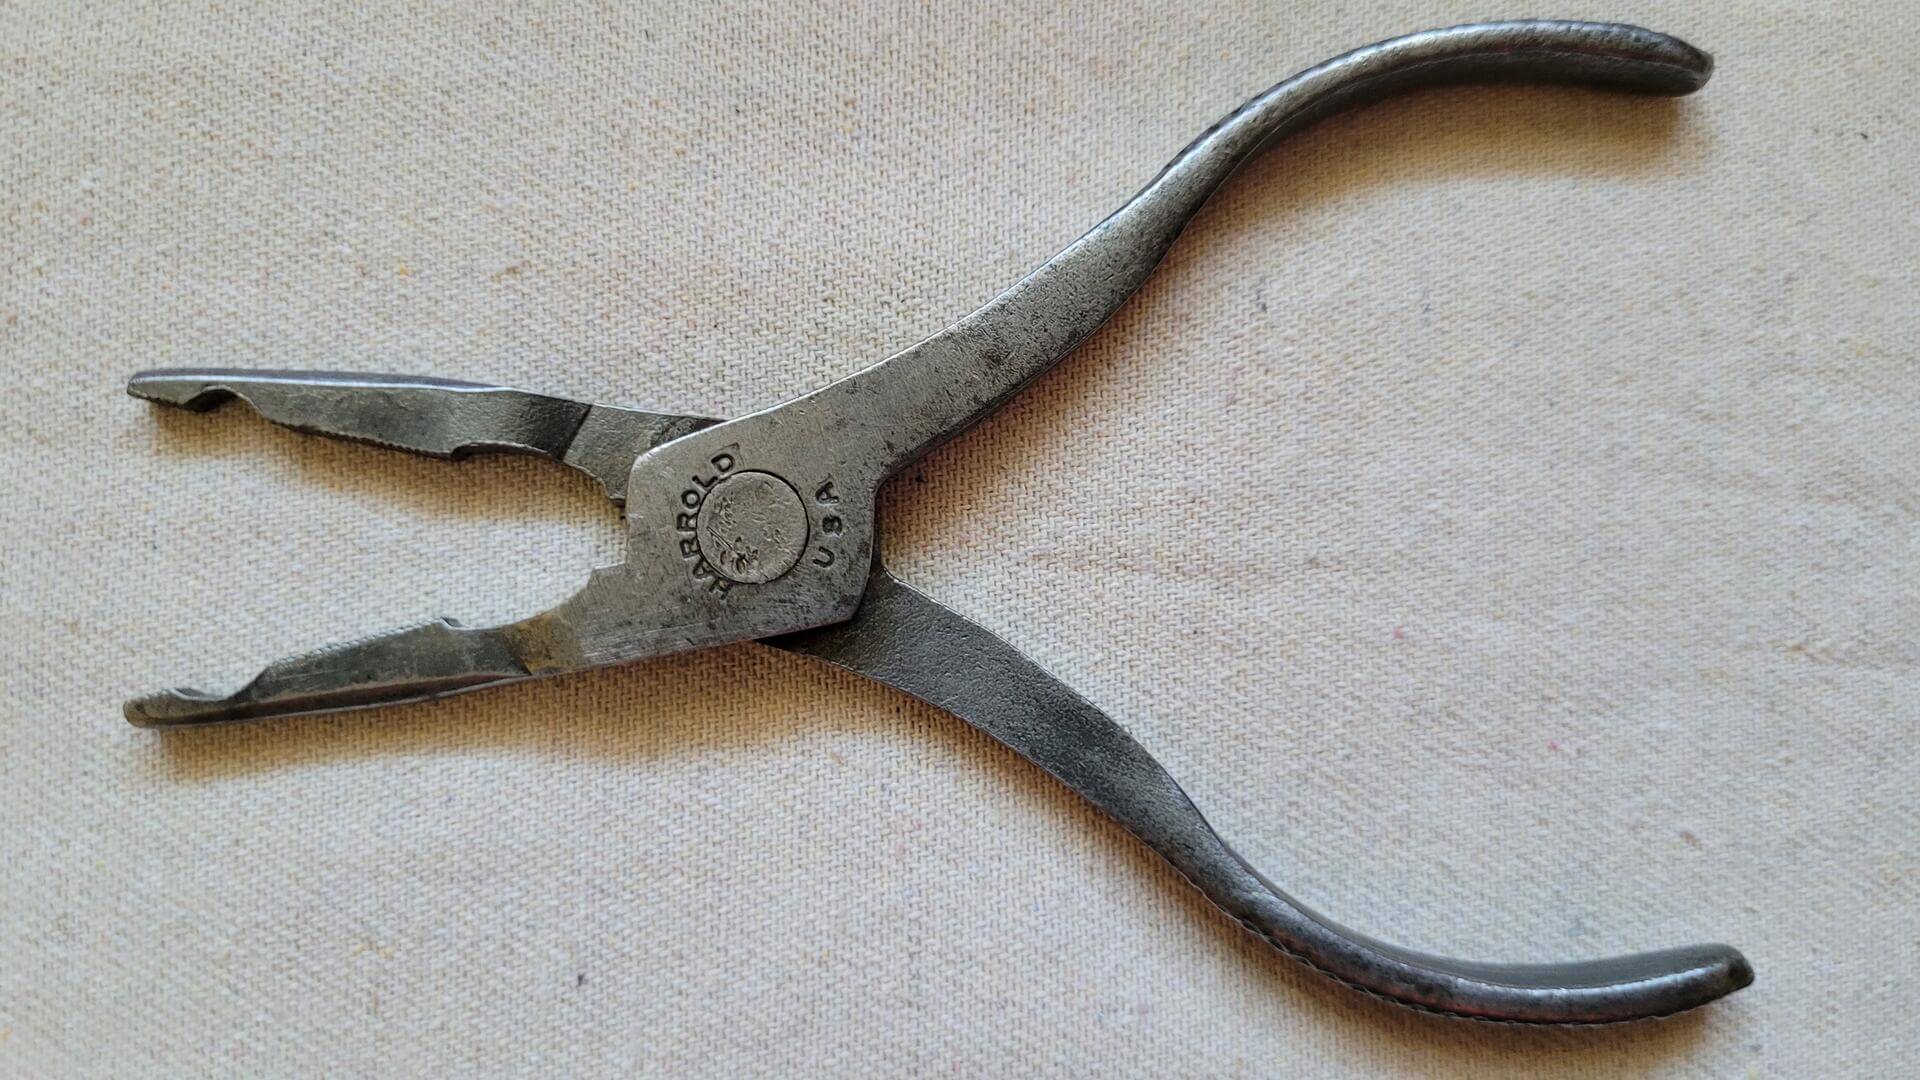 Rare vintage H.J. Harrold six inches needle nose pliers - Antique Columbiana Ohio made in USA collectible hand tools